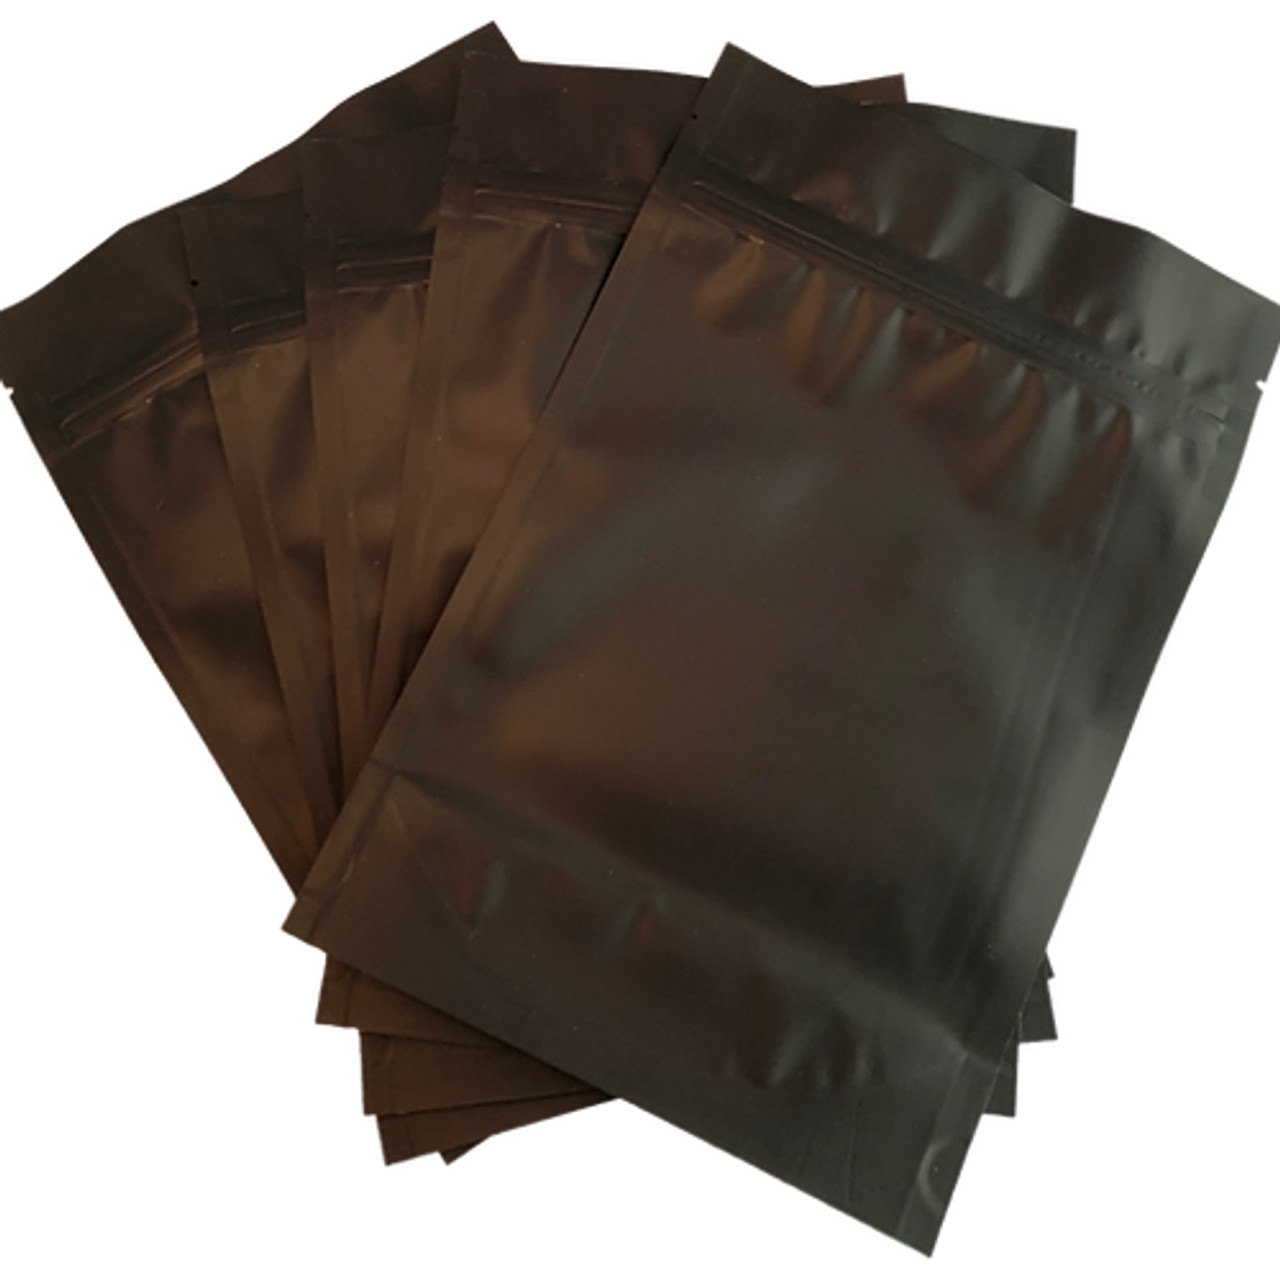 Precision Explosives Mylar Bags, Sterile Training Aid Containment